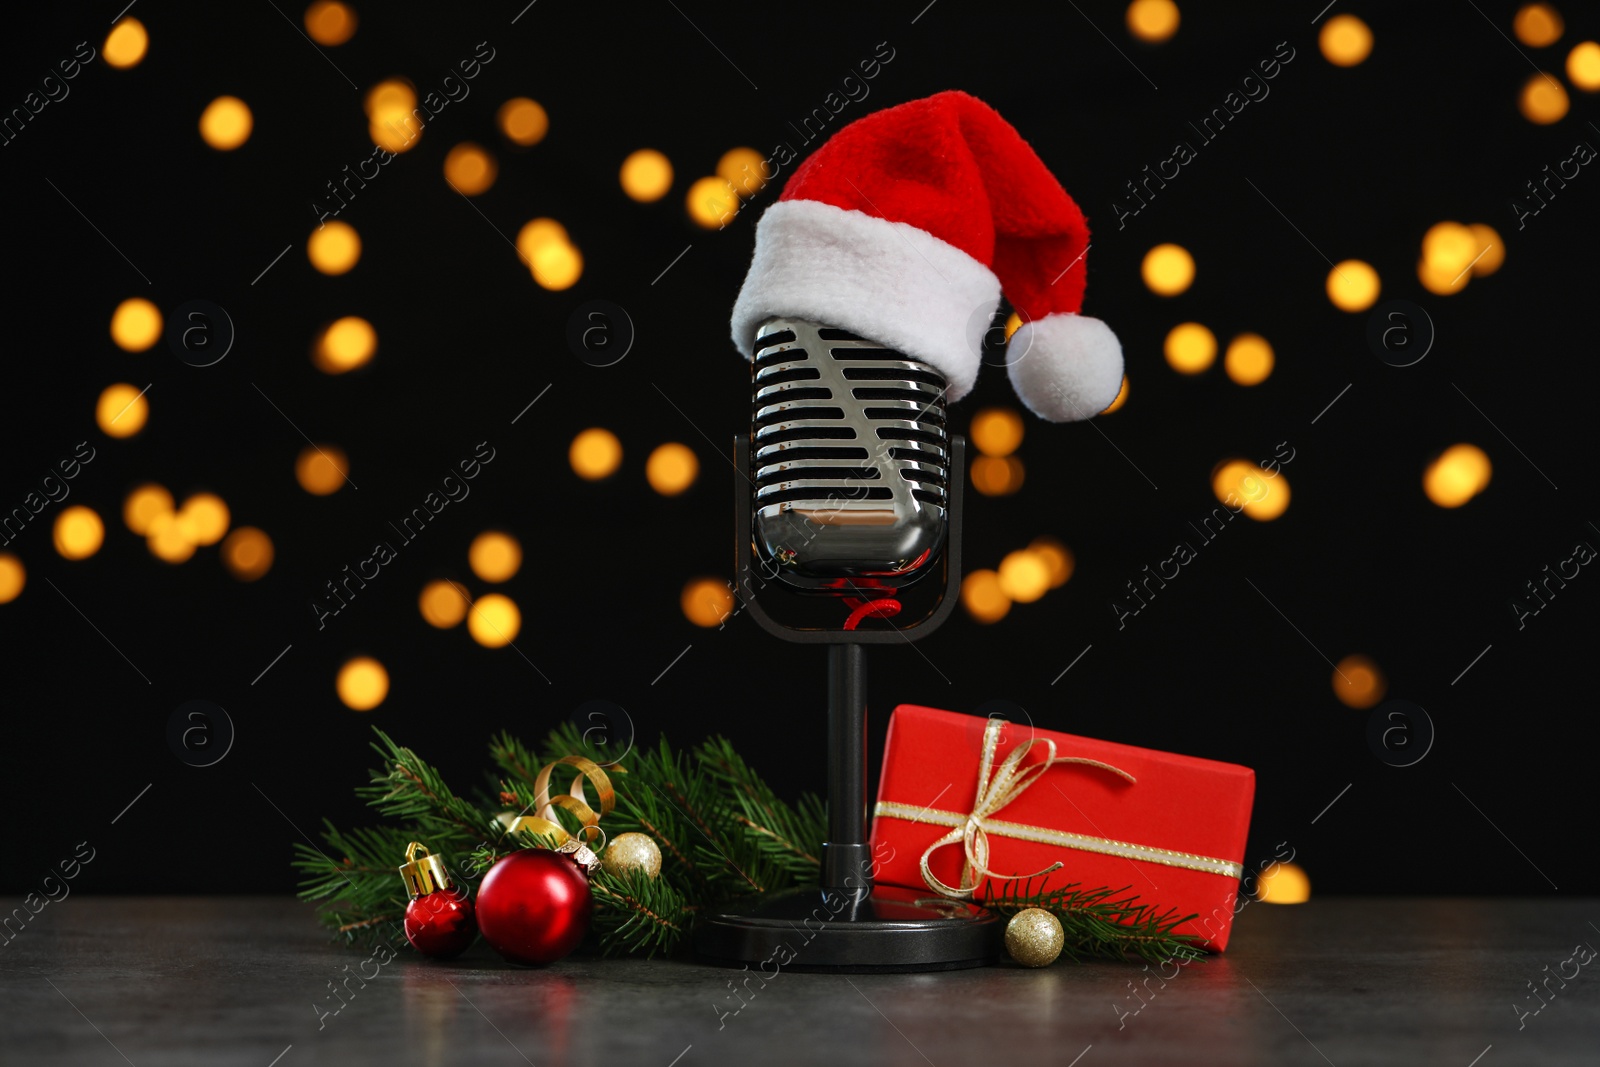 Photo of Microphone with Santa hat and decorations on grey stone table against blurred lights. Christmas music